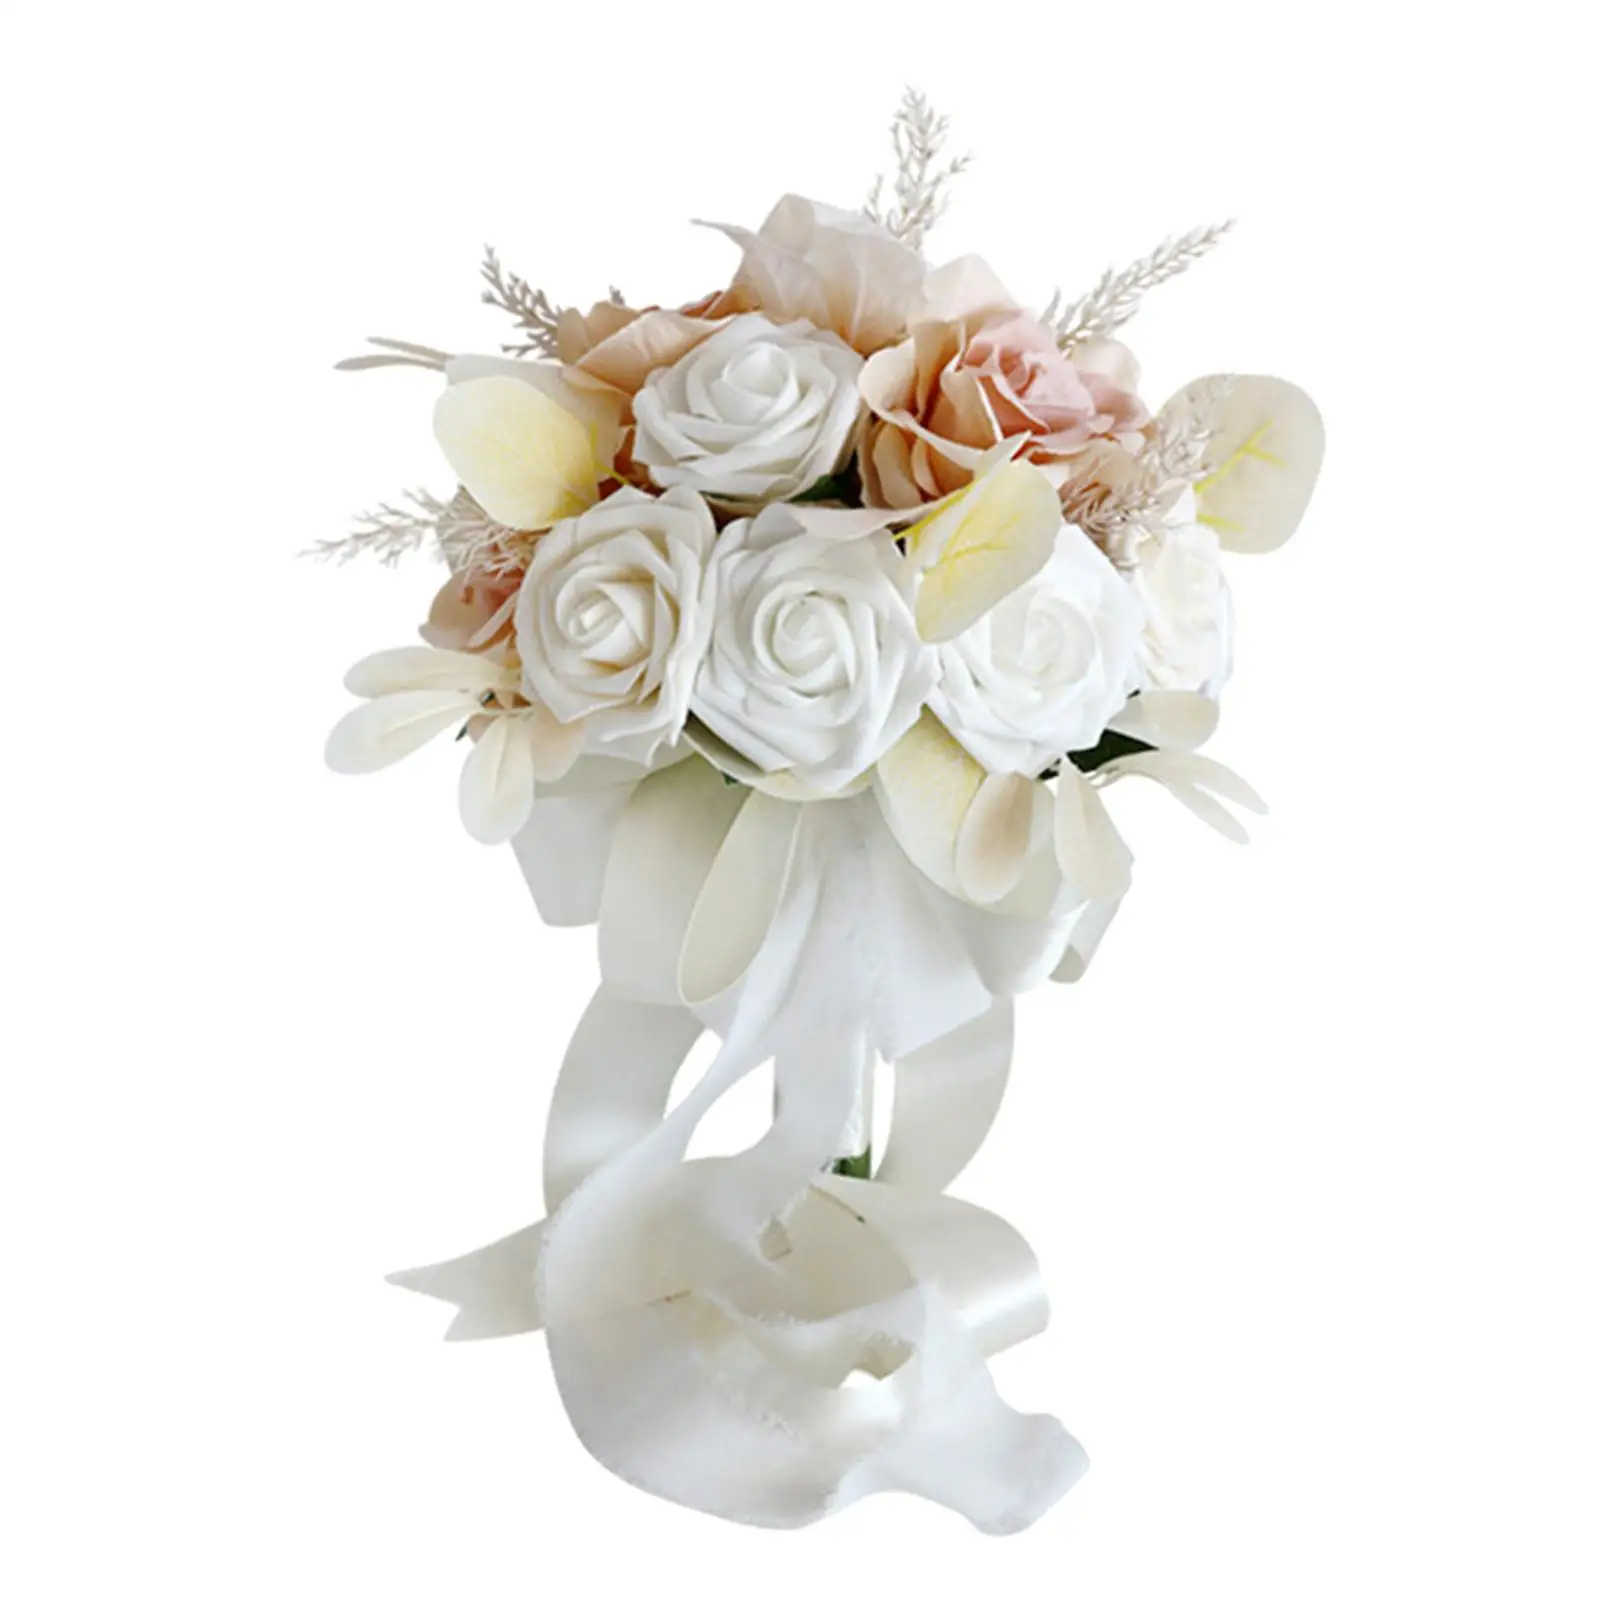 

Bridal Wedding Bouquet 22cmx30cm Centerpiece with Ribbons Artificial Flowers Decoration for Anniversary Ceremony Party Festival